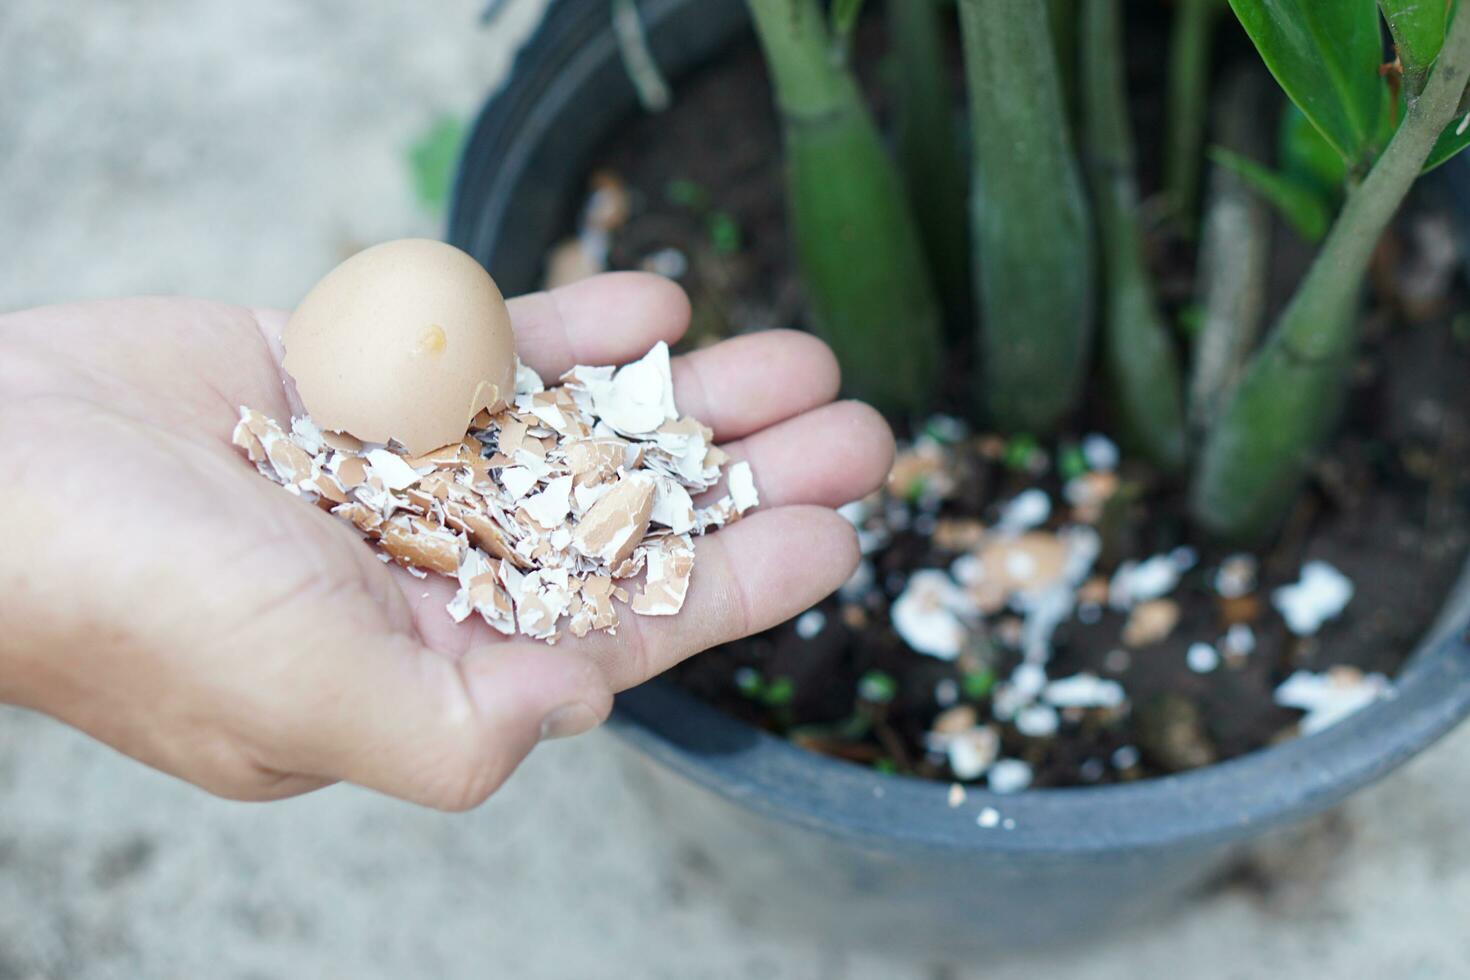 Hands hold egg shell, food scraps to fertilize plants. Concept, kitchen waste management, making compost from organic garbage. Environment conservation. Home composting . photo